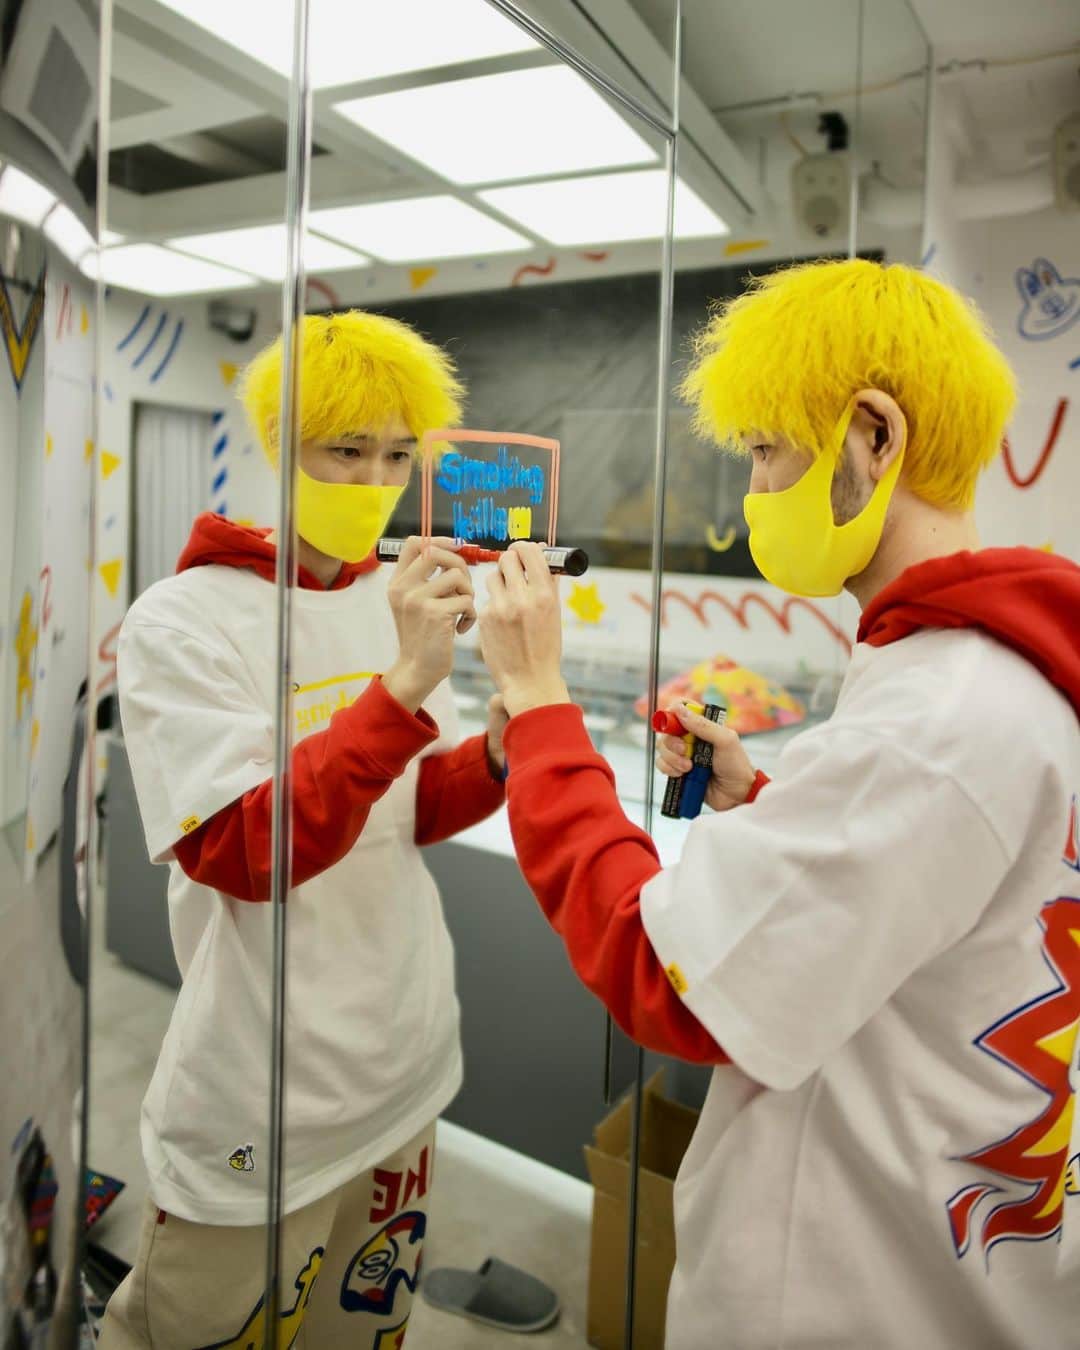 #FR2さんのインスタグラム写真 - (#FR2Instagram)「A collaboration item between #FR2 and "ITOKiN", an artist who develops art projects throughout the world under the MAKE smile slogan, will go on sale from Saturday, March 27th, 2021.   At the same time as the start of the sale, an exhibition of illustrations and art drawn directly on a wall by the artist himself will be held in the #FR2 store in Harajuku for a limited time.   *Period: 27/03/2021 (Sat.) - 02/04 (Fri.)  MAKE smileを合言葉に世界中でアートプロジェクトを展開するアーティスト、”ITOKiN”と#FR2 のコラボレーションアイテムを、2021年3月27日(土)から発売します。  さらに発売に合わせて、原宿の#FR2 店内では期間限定で本人が直接壁に描いたイラストやアートの展示も同時に開催。お近くにお越しの際は是非お立ち寄り下さい。  ※期間：2021年3月27日(土) ～ 4月2日(金)  #FR2 与以“MAKE smile”为口号，在世界各地开展艺术项目的艺术家 "ITOKiN "的合作商品将于2021年3月27日（周六）发售。  为配合发售，还将在原宿#FR2 店内同时限期举行由本人直接在墙壁上绘制的插画和艺术展。若您来到附近，敬请一定光临。  ※ 时间：2021年3月27日（周六）～ 4月2日(周五)  以 MAKE smile 為標語於全球展開藝術活動的藝術家──「ITOKiN」與 #FR2  的聯名商品，將於 2021 年 3 月 27 日（六）開始販售。  配合商品發售，原宿的 #FR2 店內也將同時舉辦期間限定的展覽，展示由藝術家本人直接描繪於牆面上的插畫及藝術作品。蒞訪附近時請務必順道光臨。  ※活動期間：2021 年 3 月 27 日（六）至 4 月 2 日（五）」3月25日 19時57分 - fxxkingrabbits